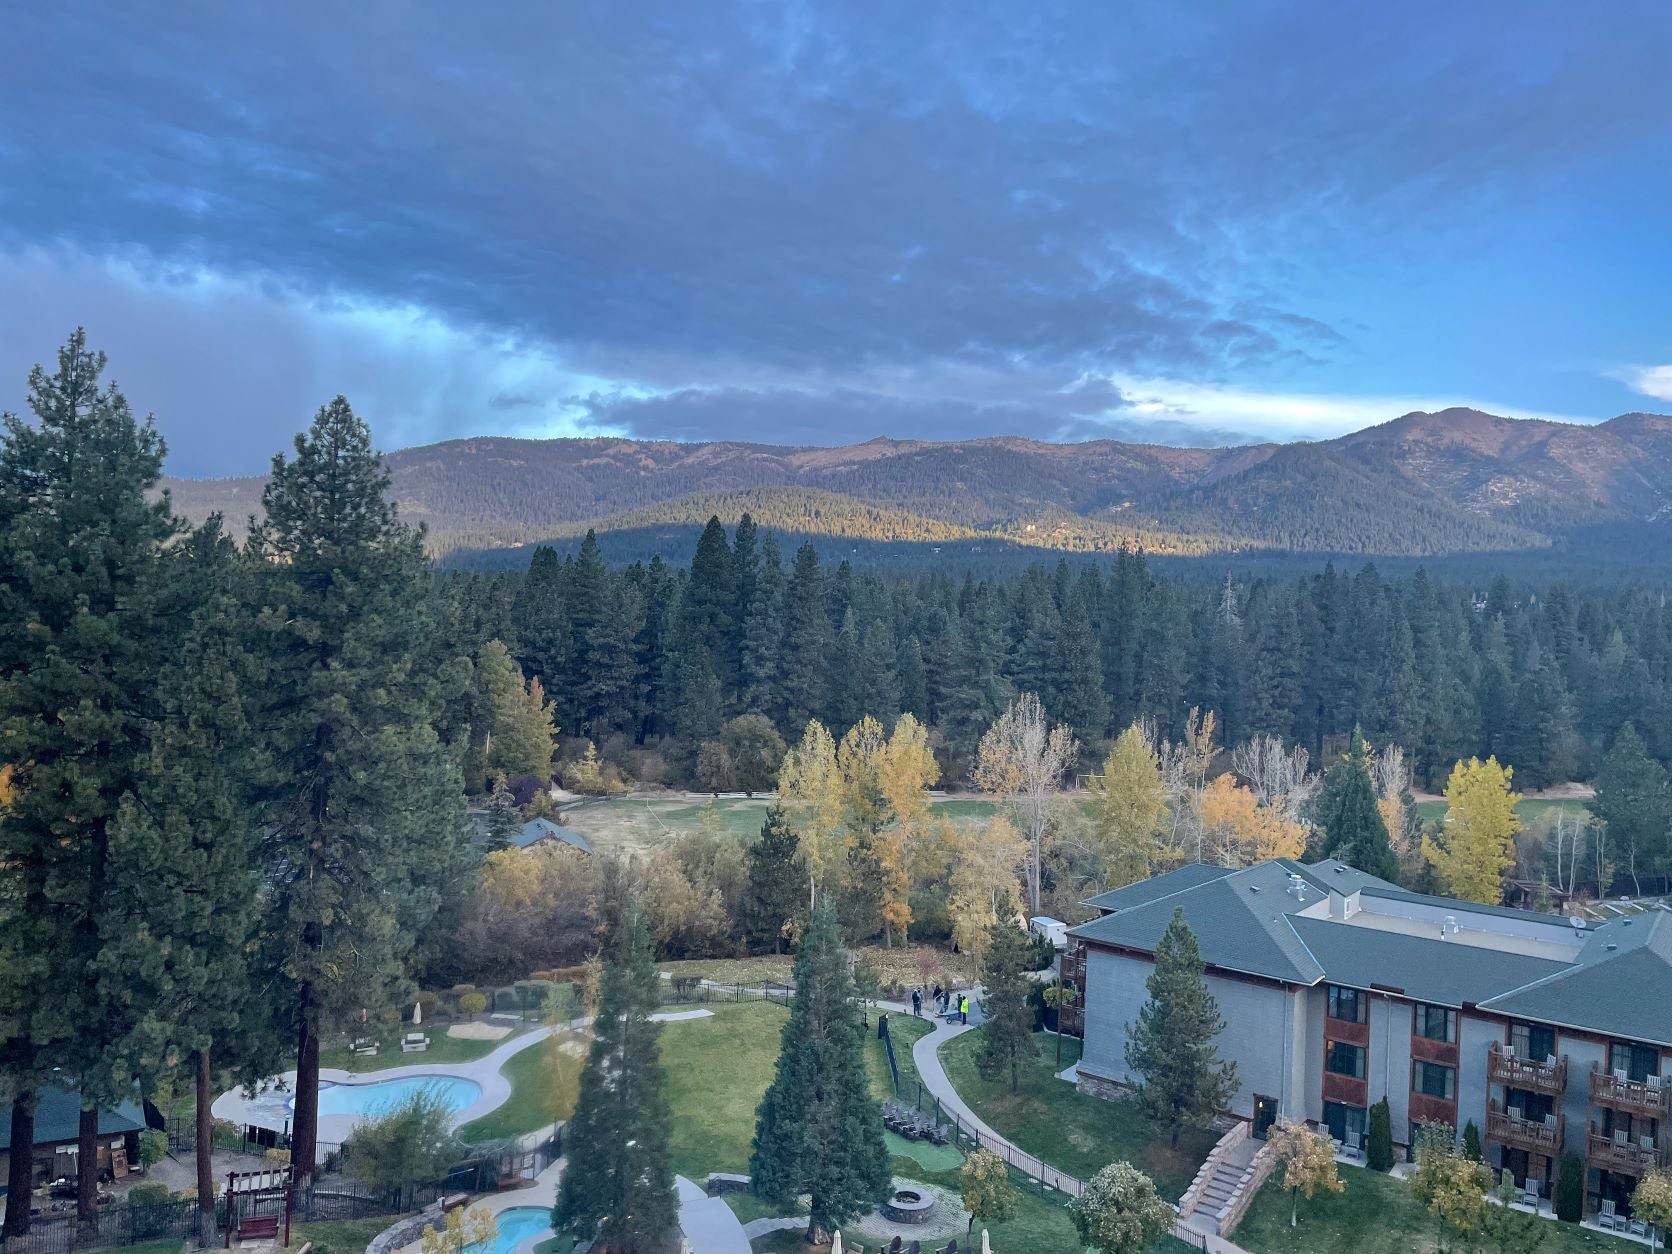 The Minus33 marketing team attended the Outdoor Media Summit (OMS) in Lake Tahoe, Nevada. There was a lot of networking as well as learning while attending this conference for a few days.